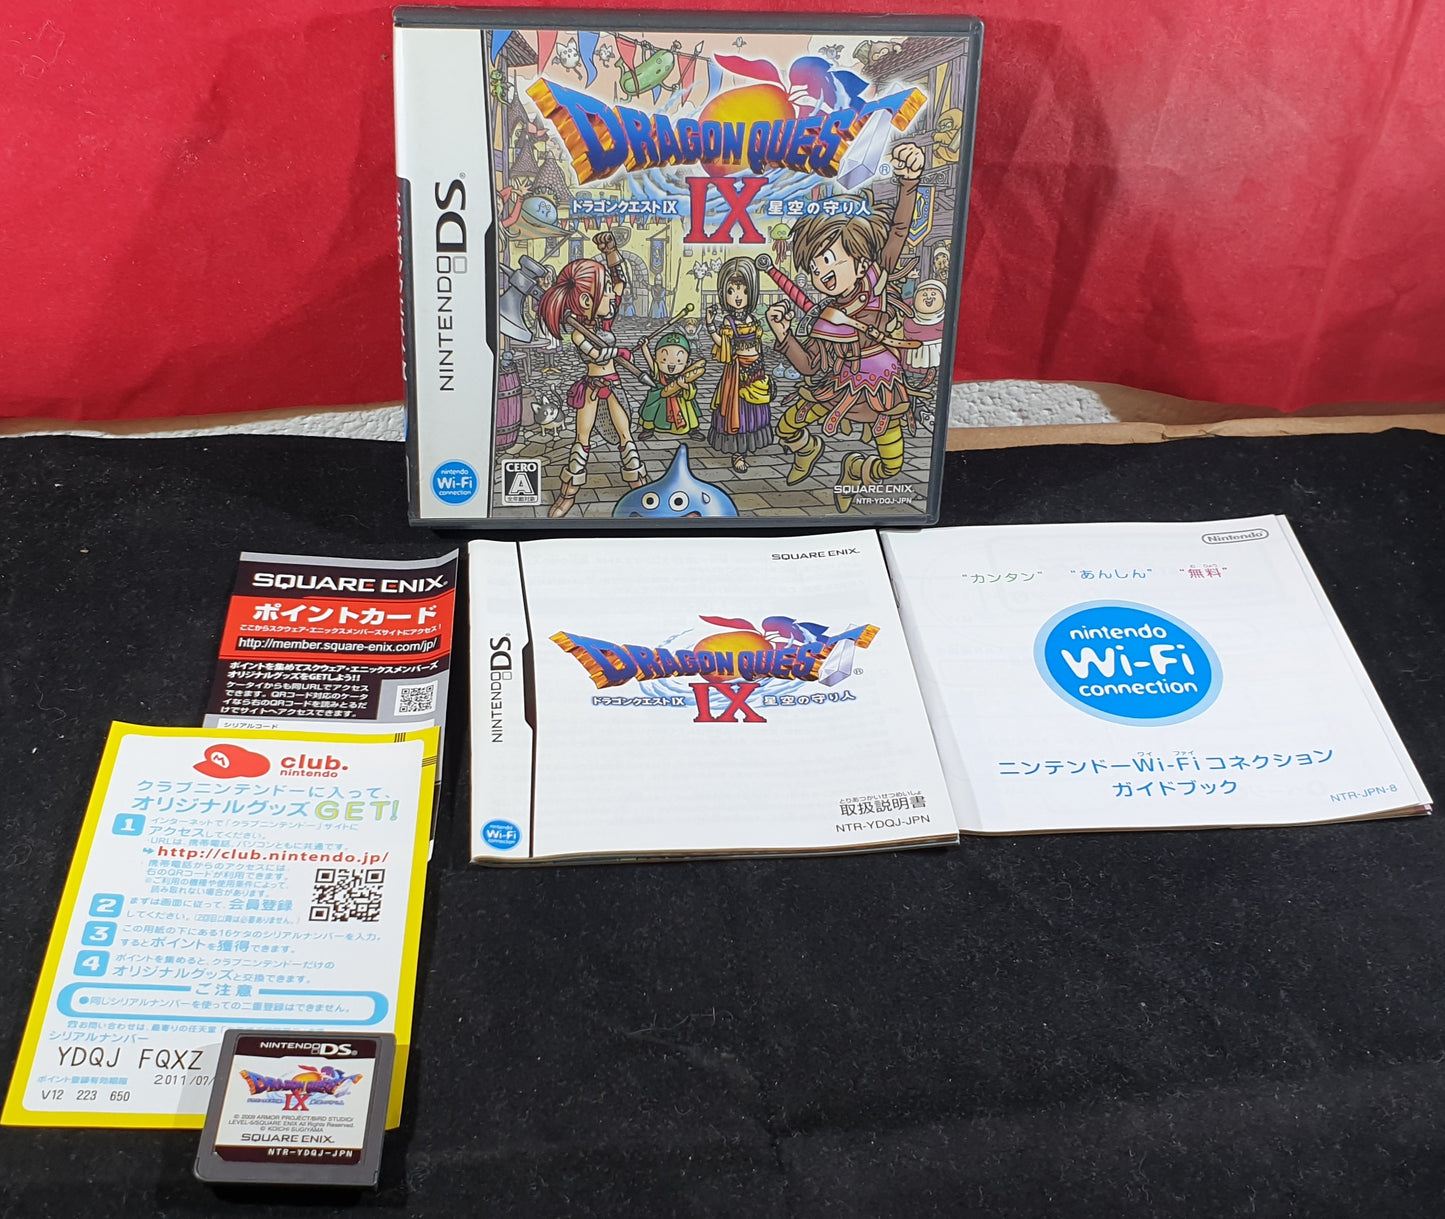 Dragon Quest IX Sentinels of the Starry Skies Nintendo DS Game (Japanese Version)